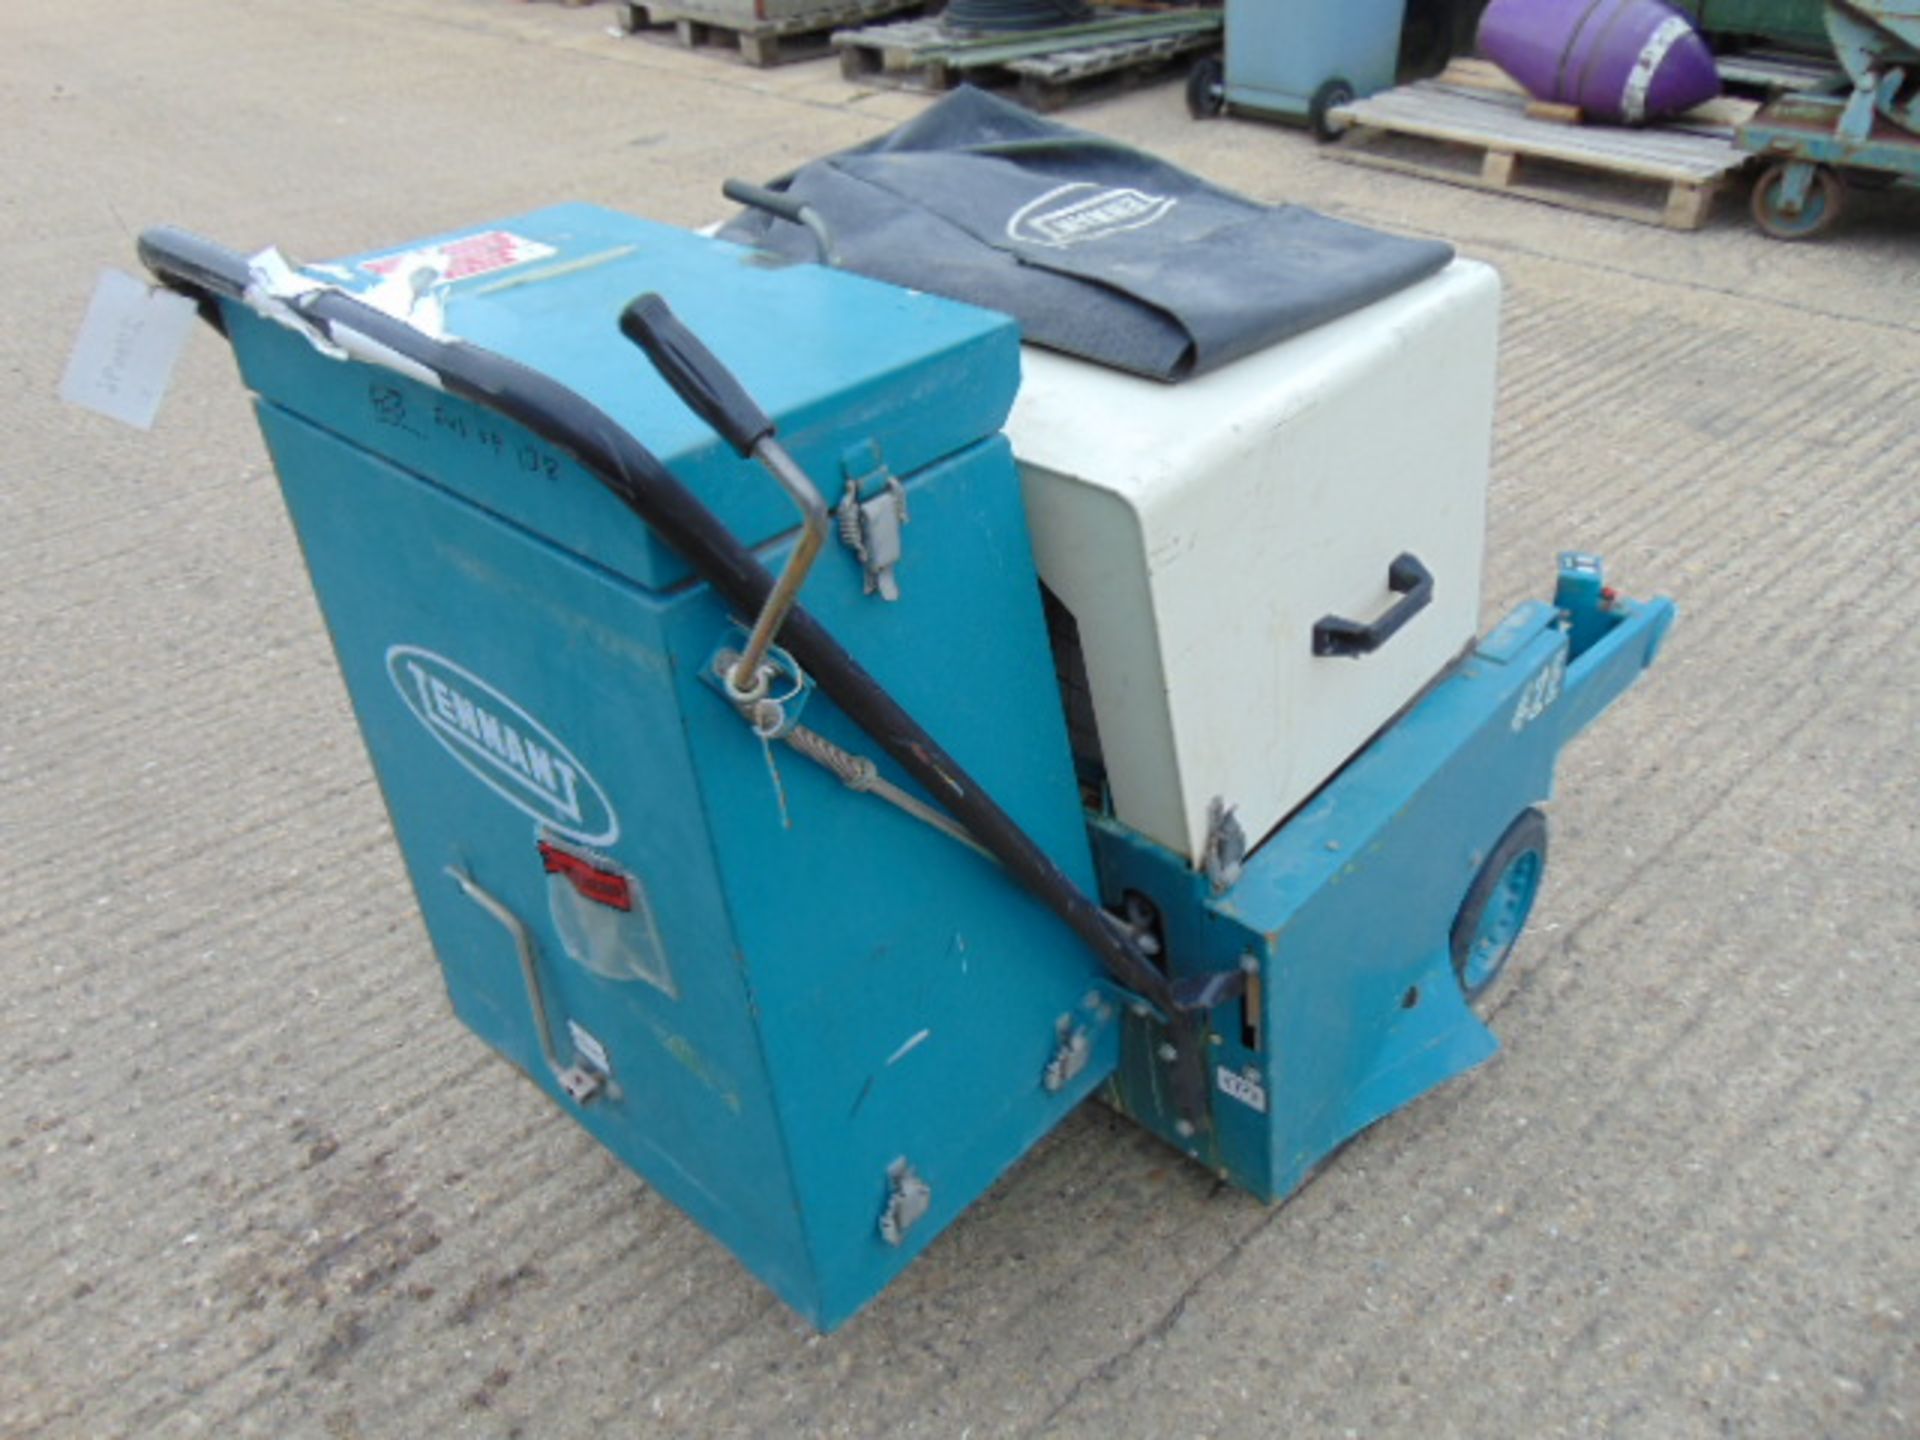 Tennant 42E Walk Behind Electric Sweeper - Image 5 of 8